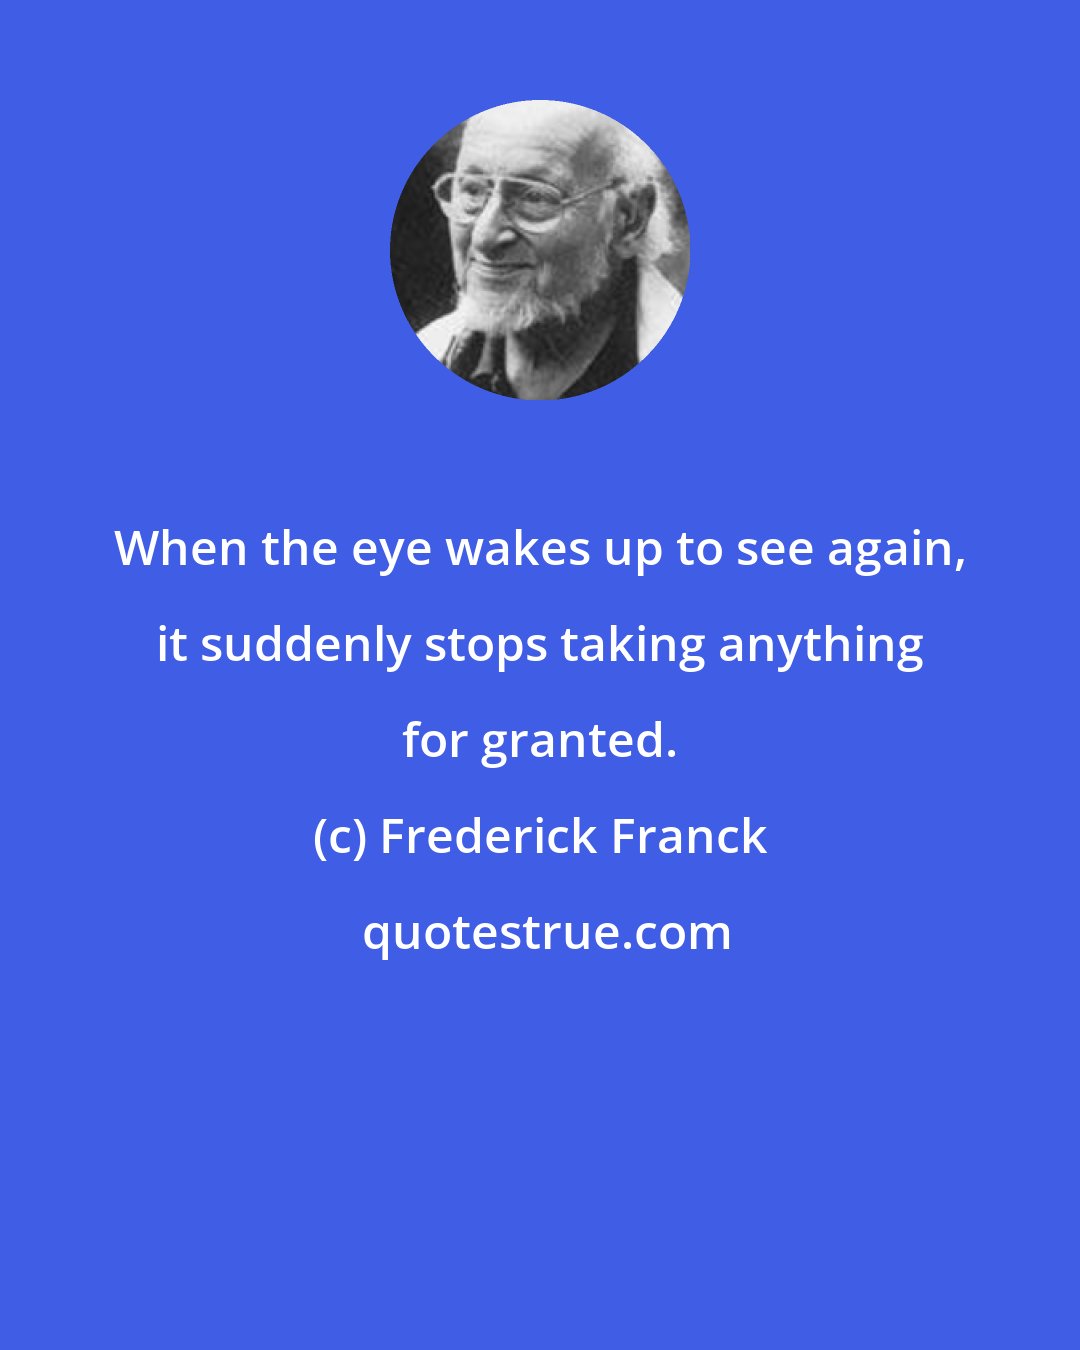 Frederick Franck: When the eye wakes up to see again, it suddenly stops taking anything for granted.